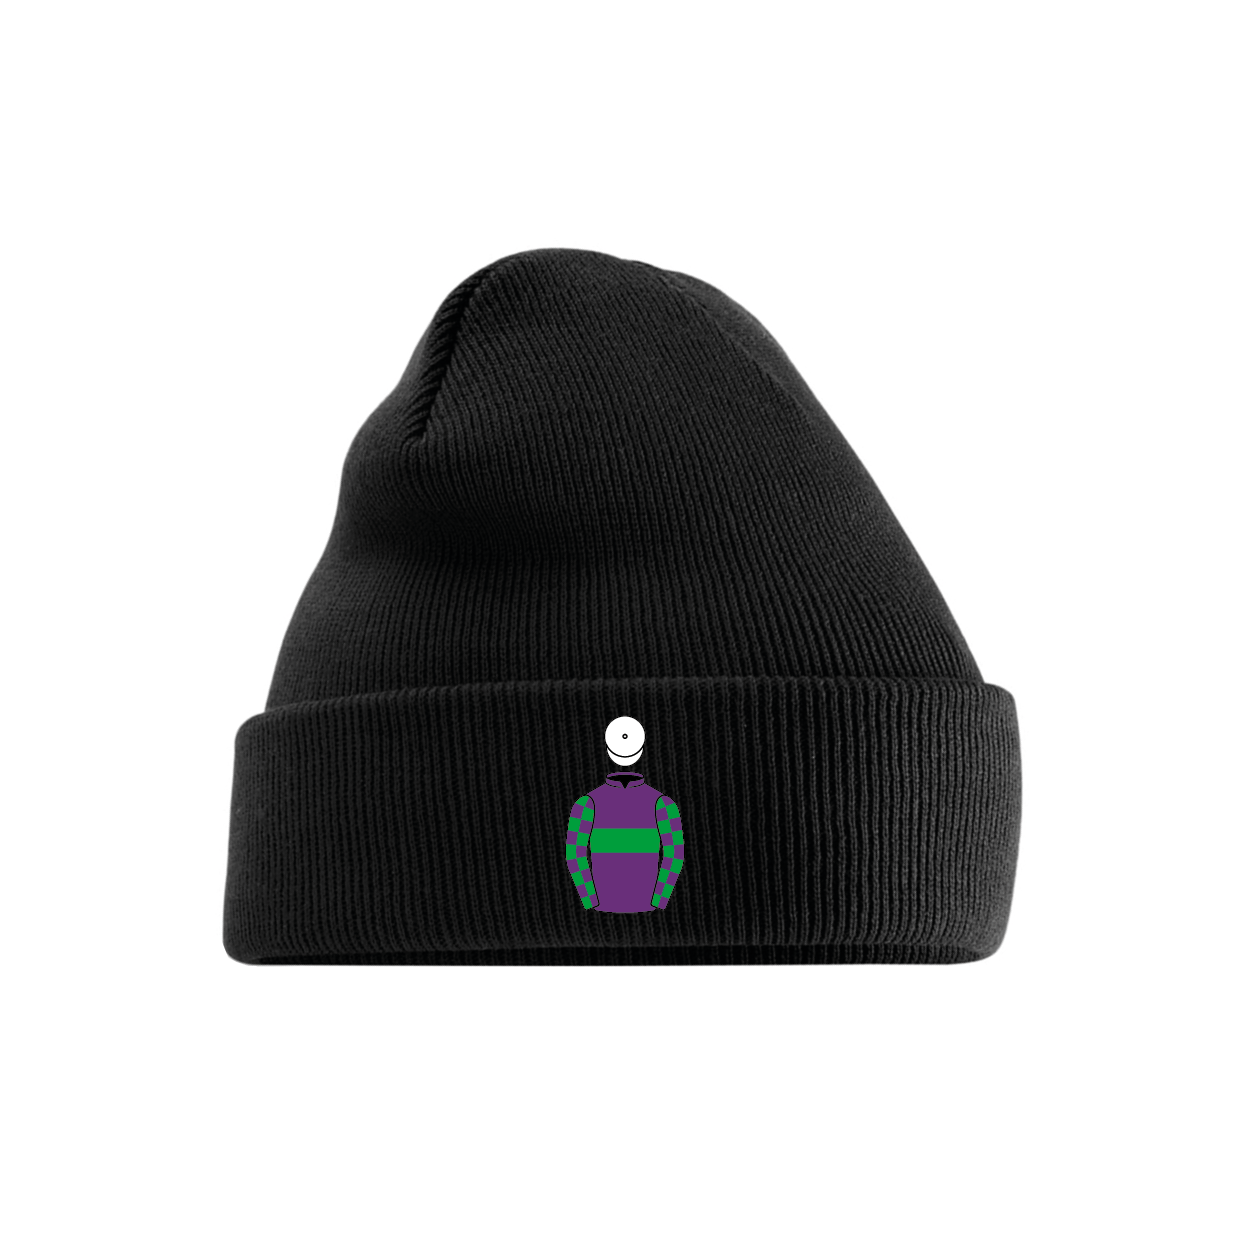 The Englands And Heywoods Embroidered Cuffed Beanie - Hacked Up